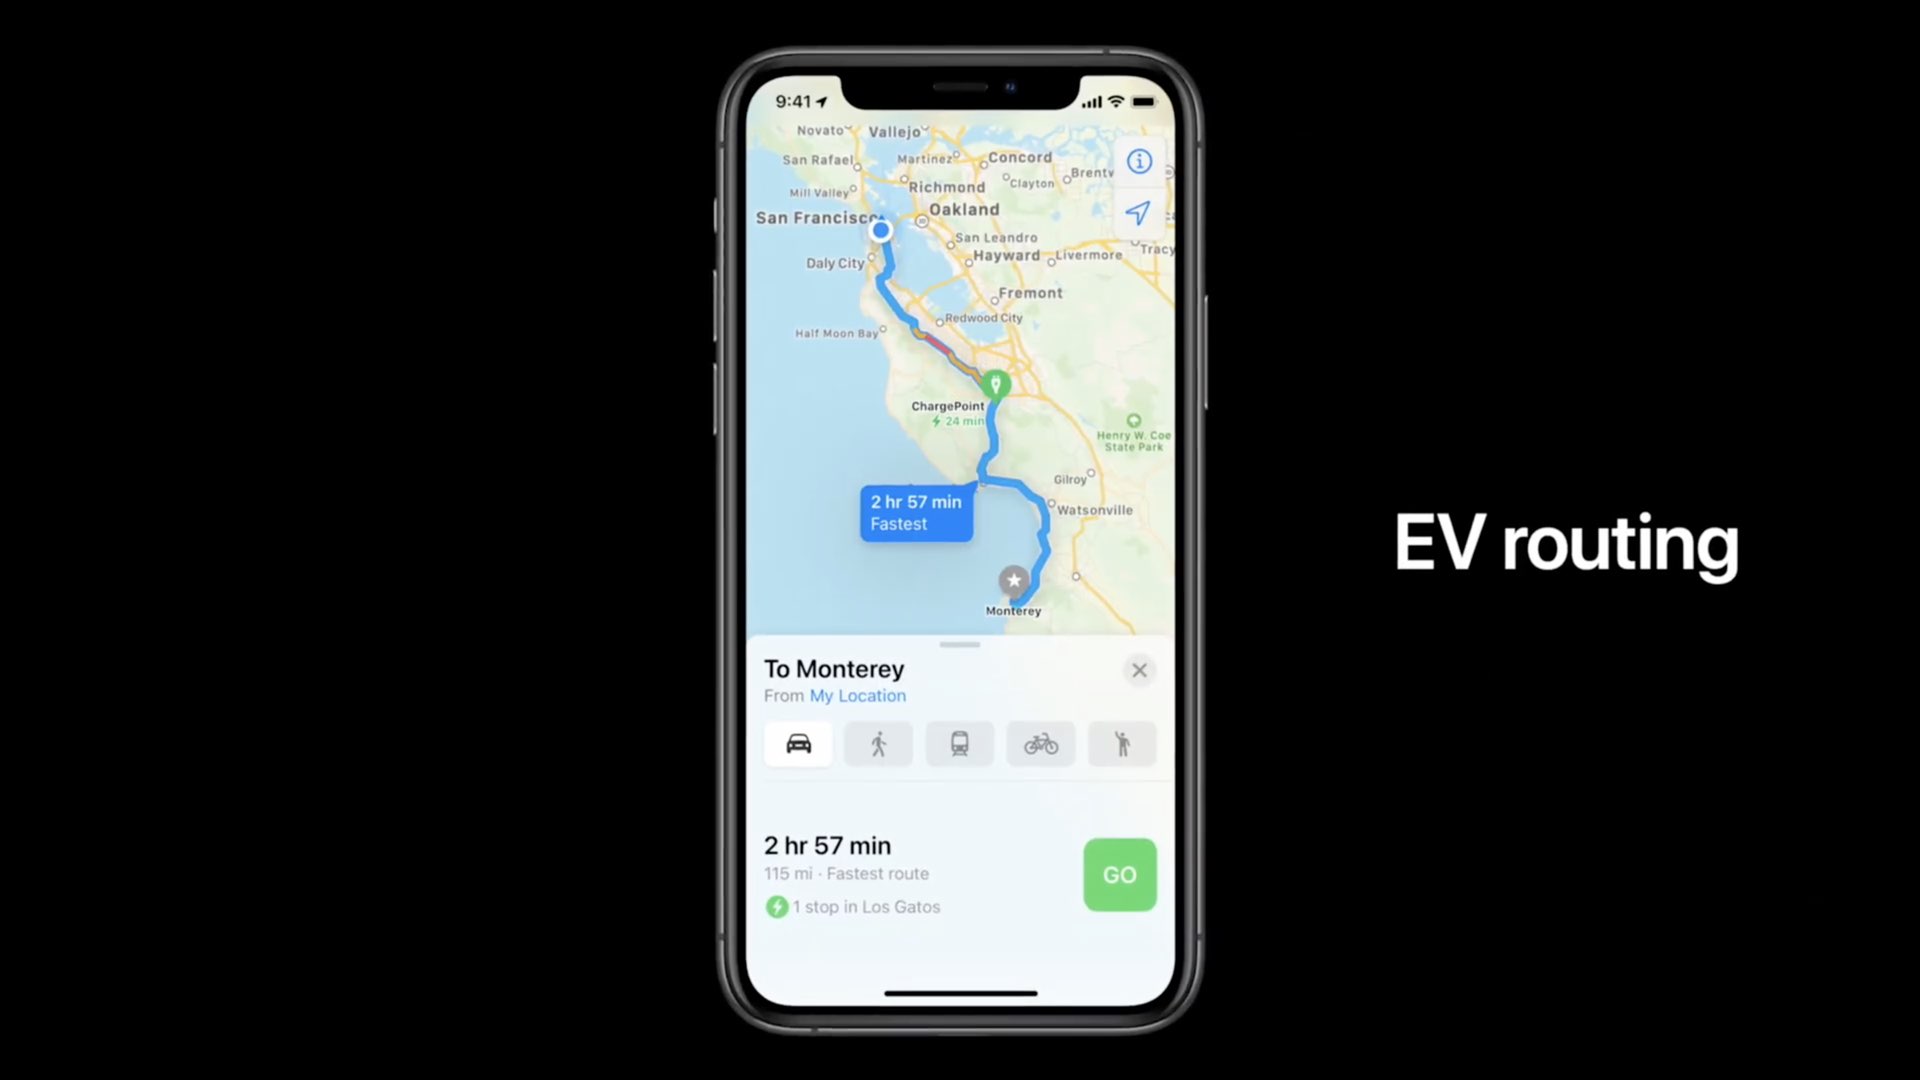 Apple Maps electric vehicle routing - a WWDC 2020 slide showing EV routing running on an iPhone